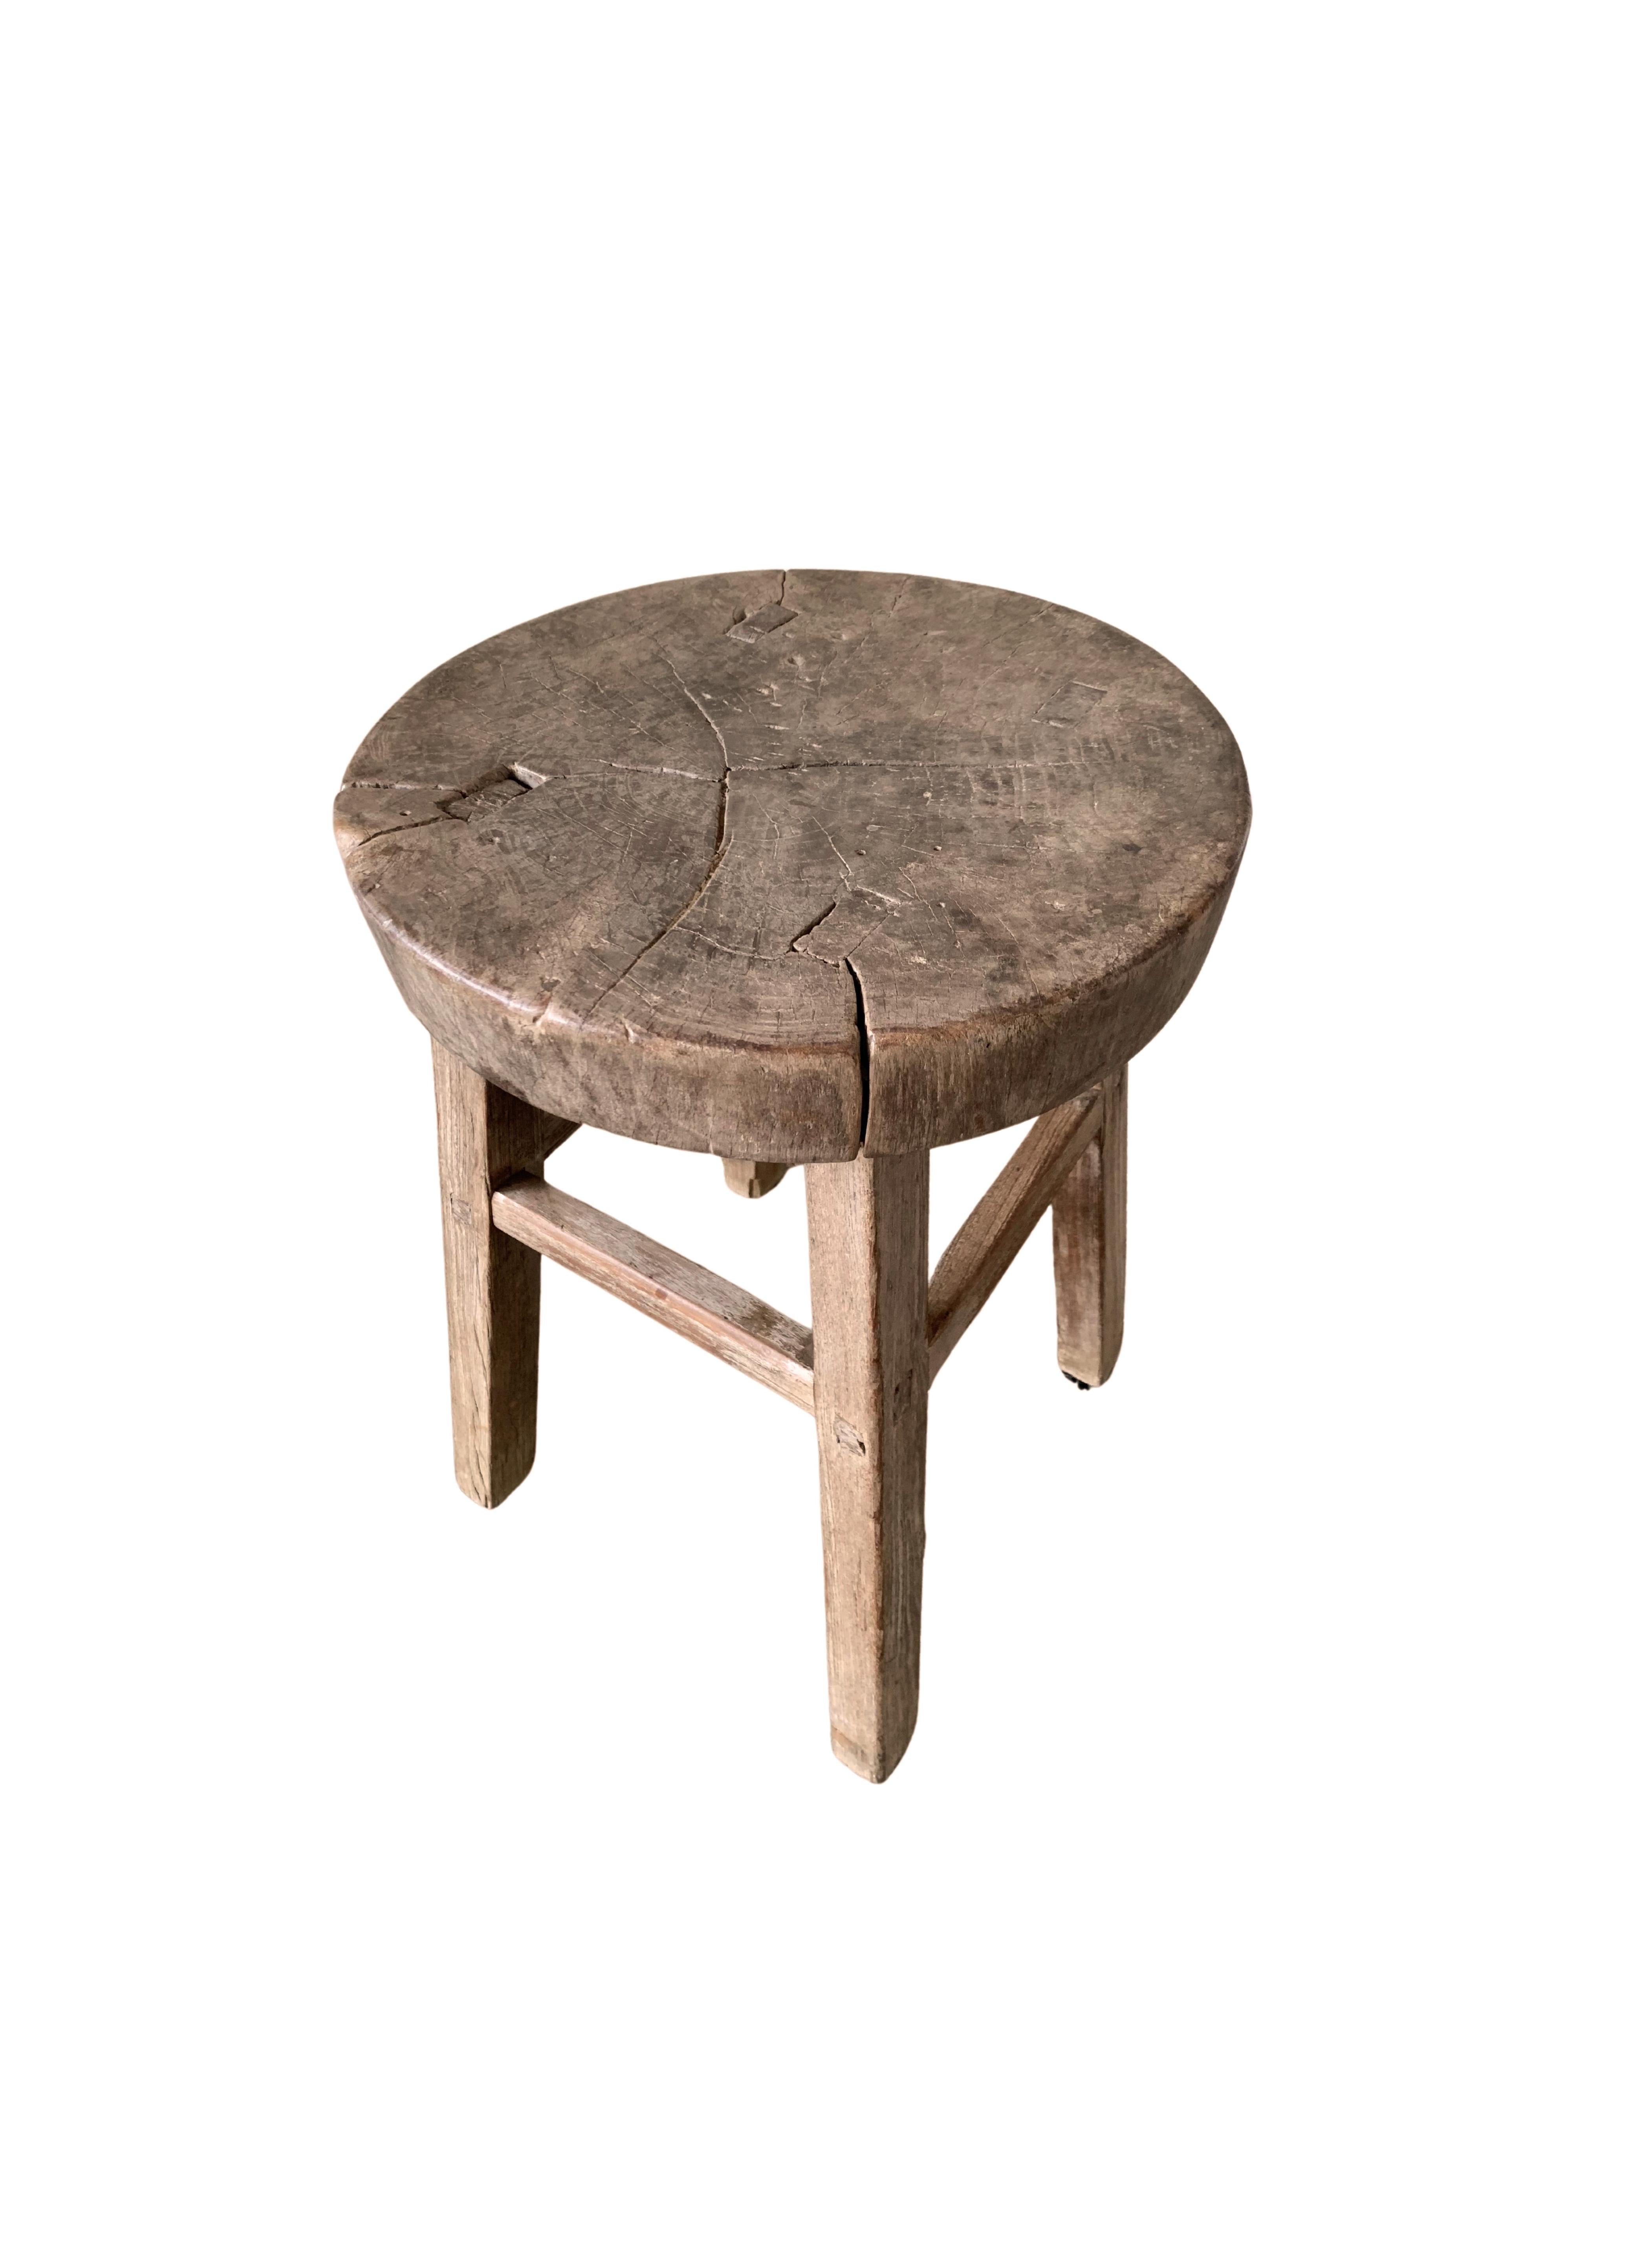 This antique elm wood stool comes from China's Hubei province. It was crafted using only wooden joints. The elm wood has aged beautifully over its more than 100 years of life. The seat is crafted from a thick and textured slab of elmwood. 


